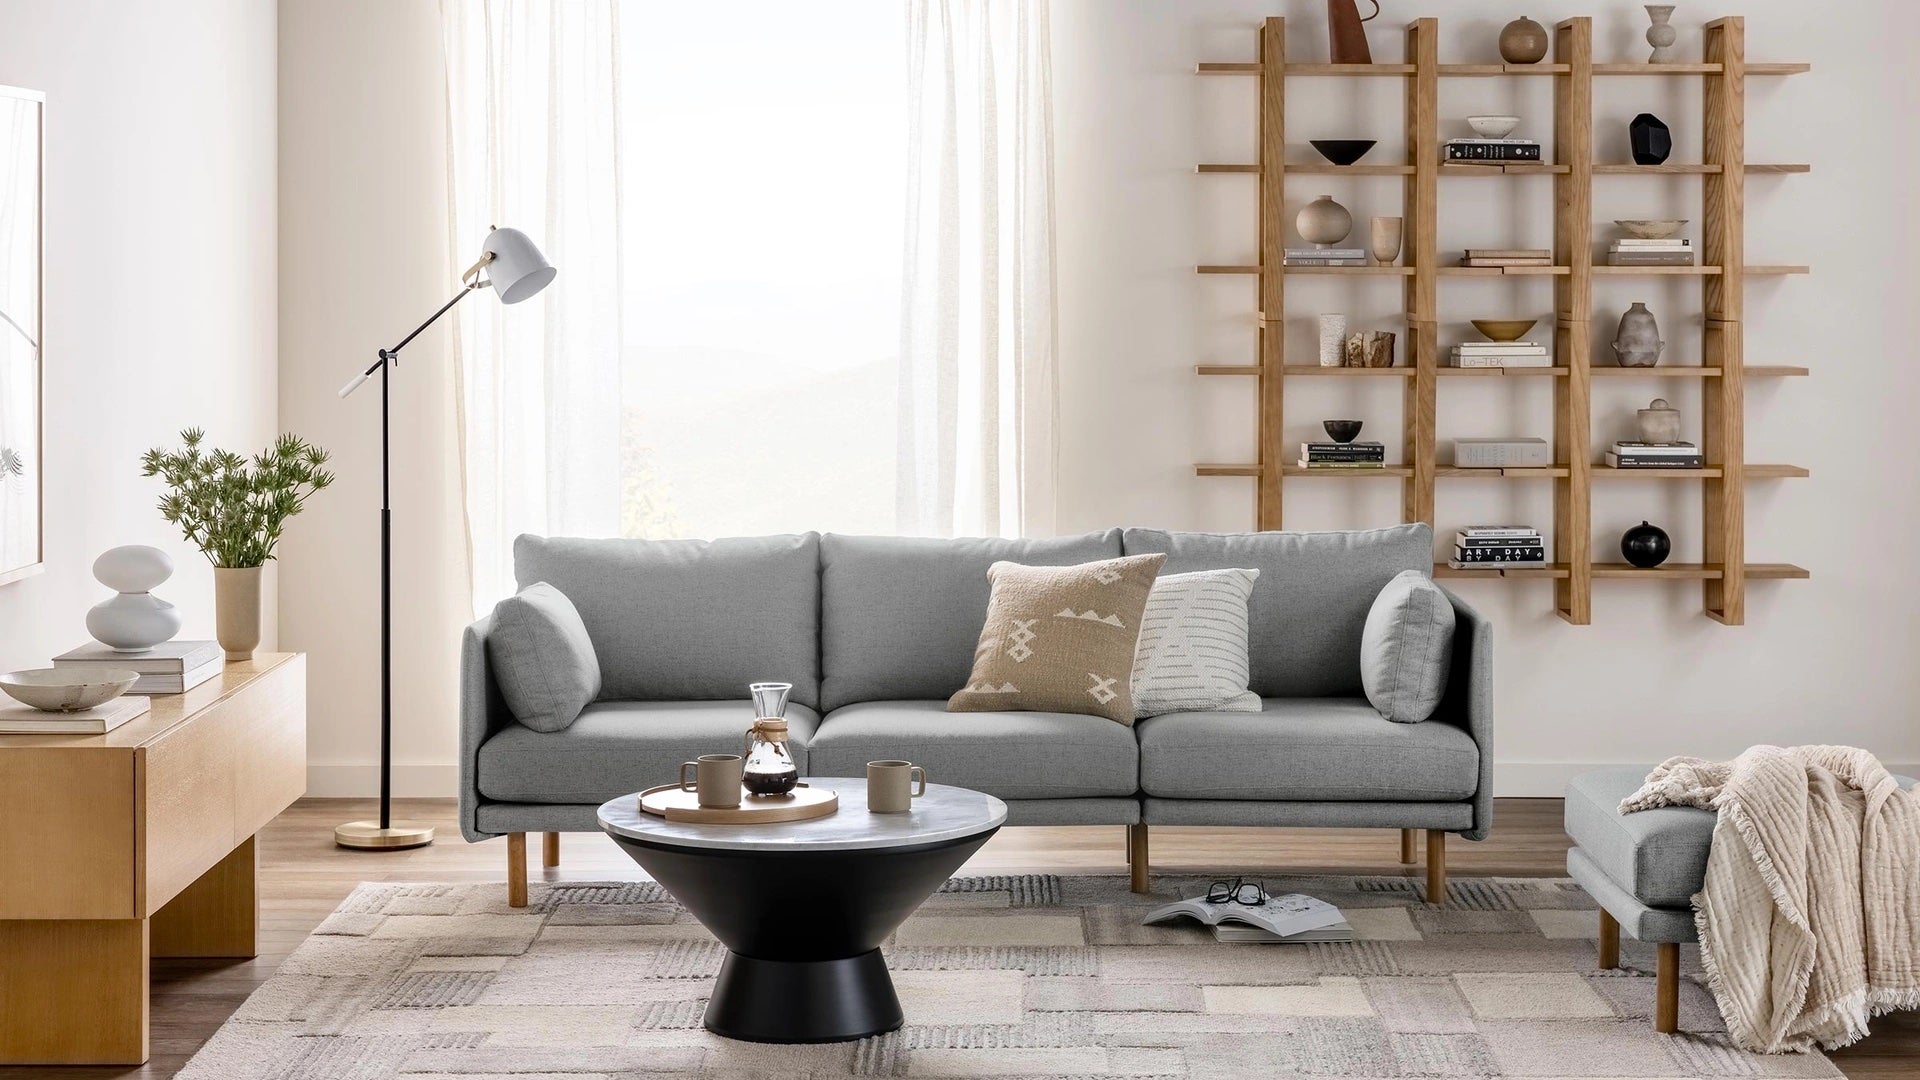 A modern living room with a light gray sofa adorned with patterned throw pillows, a round black coffee table, and a light wooden floor lamp. Shelves filled with decor items are mounted on the wall behind the sofa. A large window with sheer curtains is in the background.